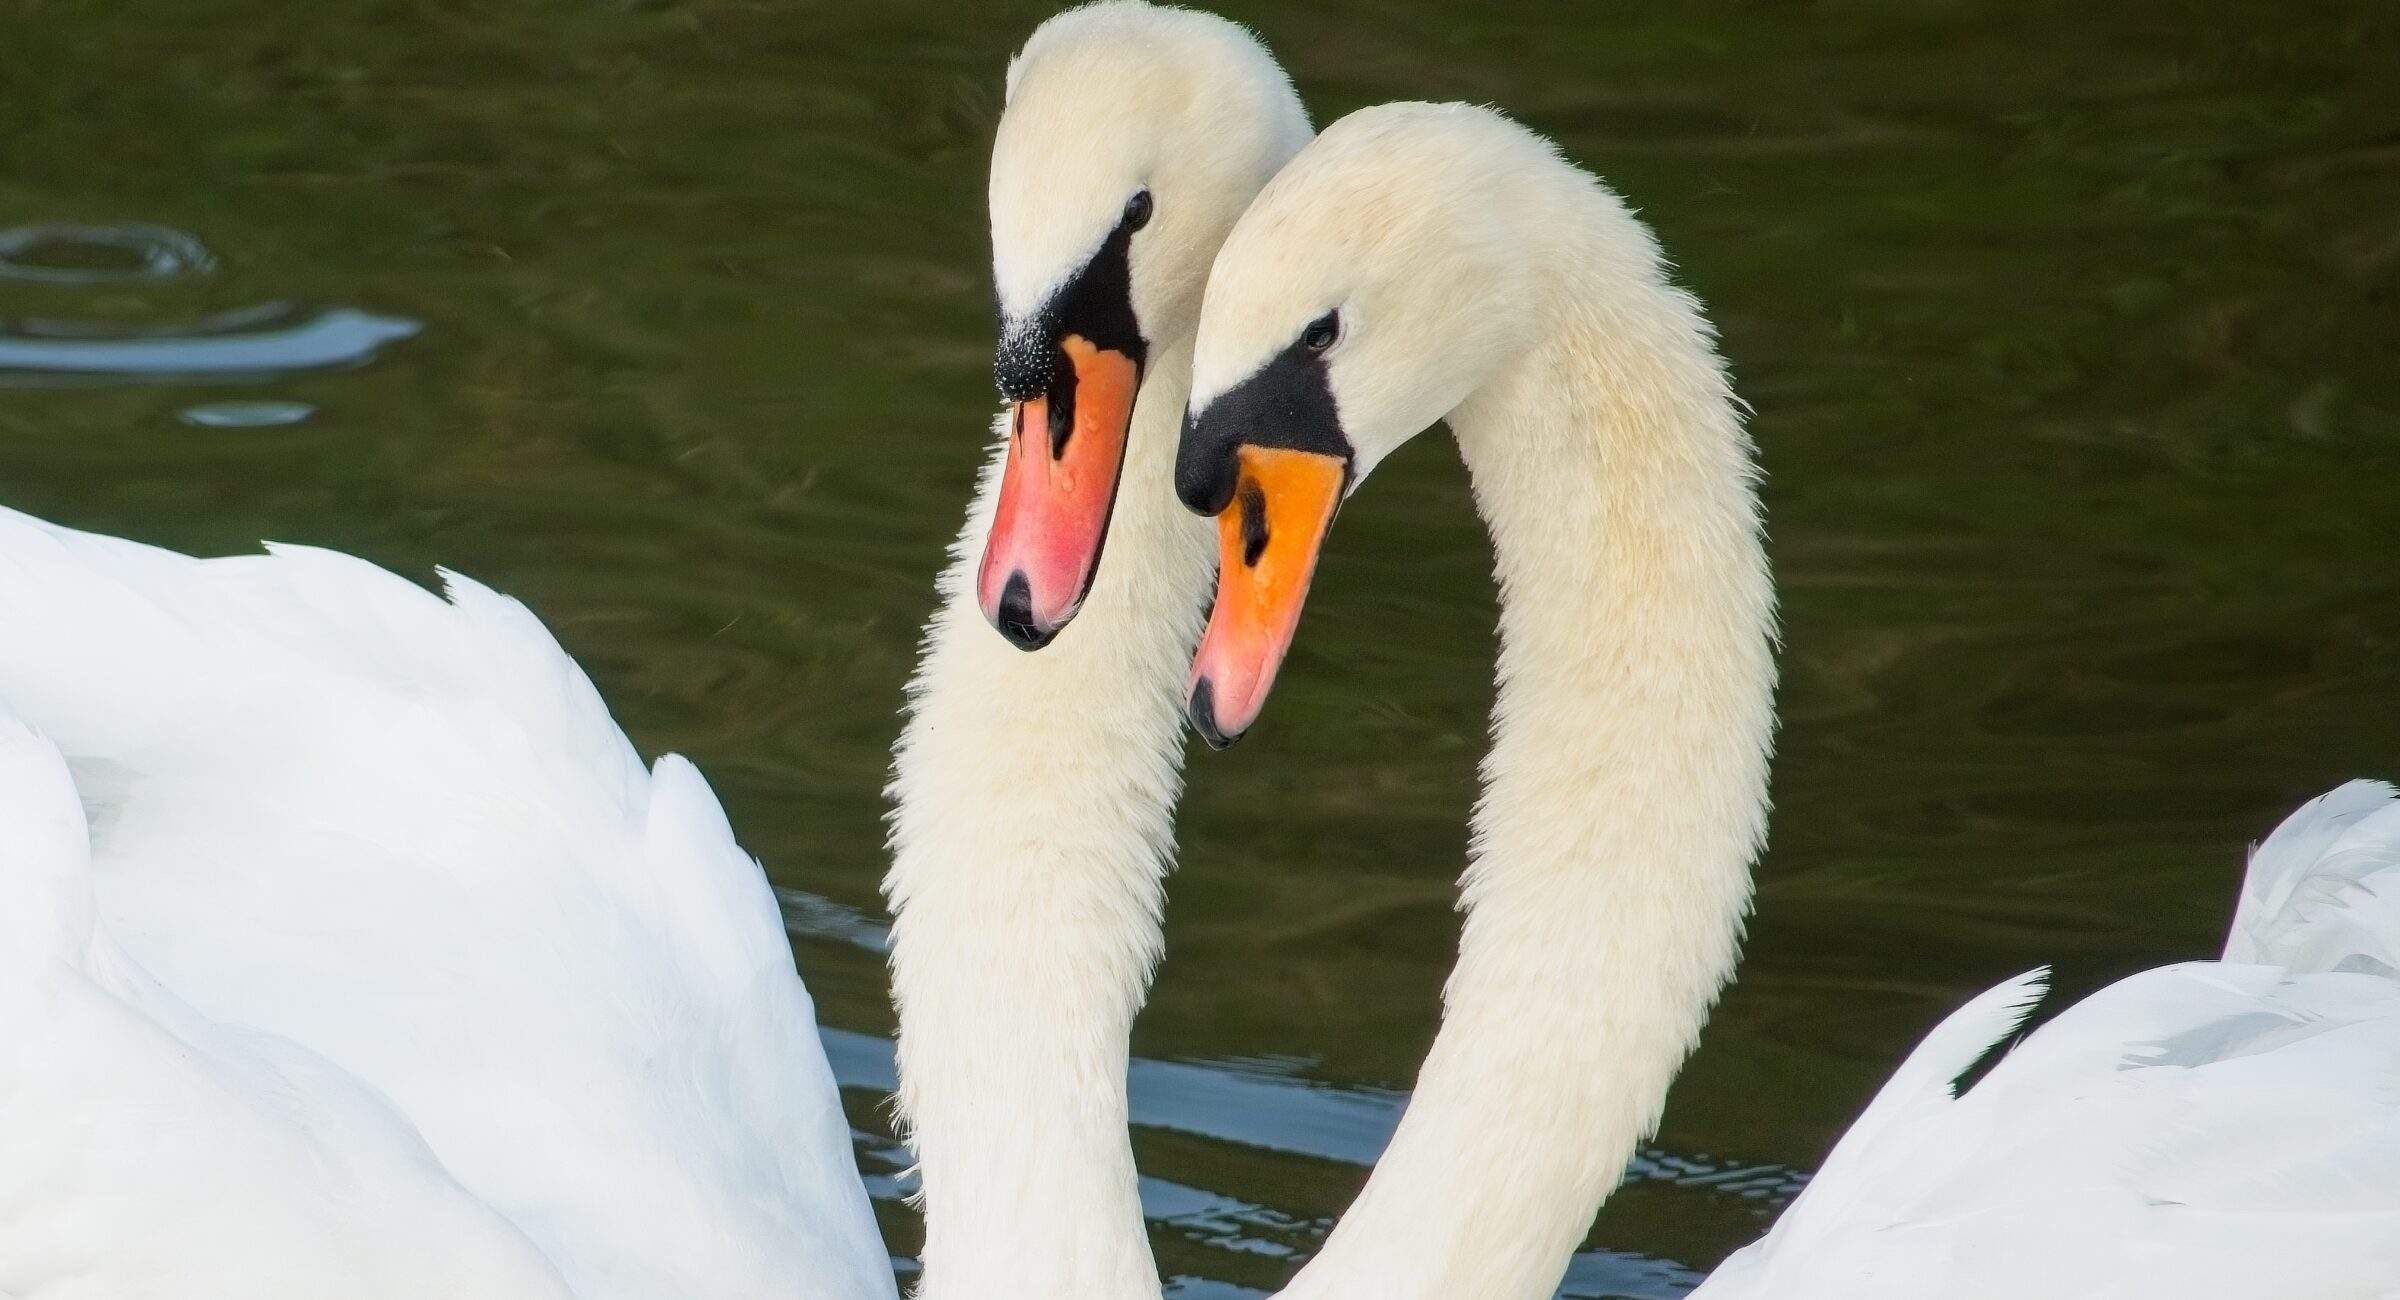 Pair of Swans on a River